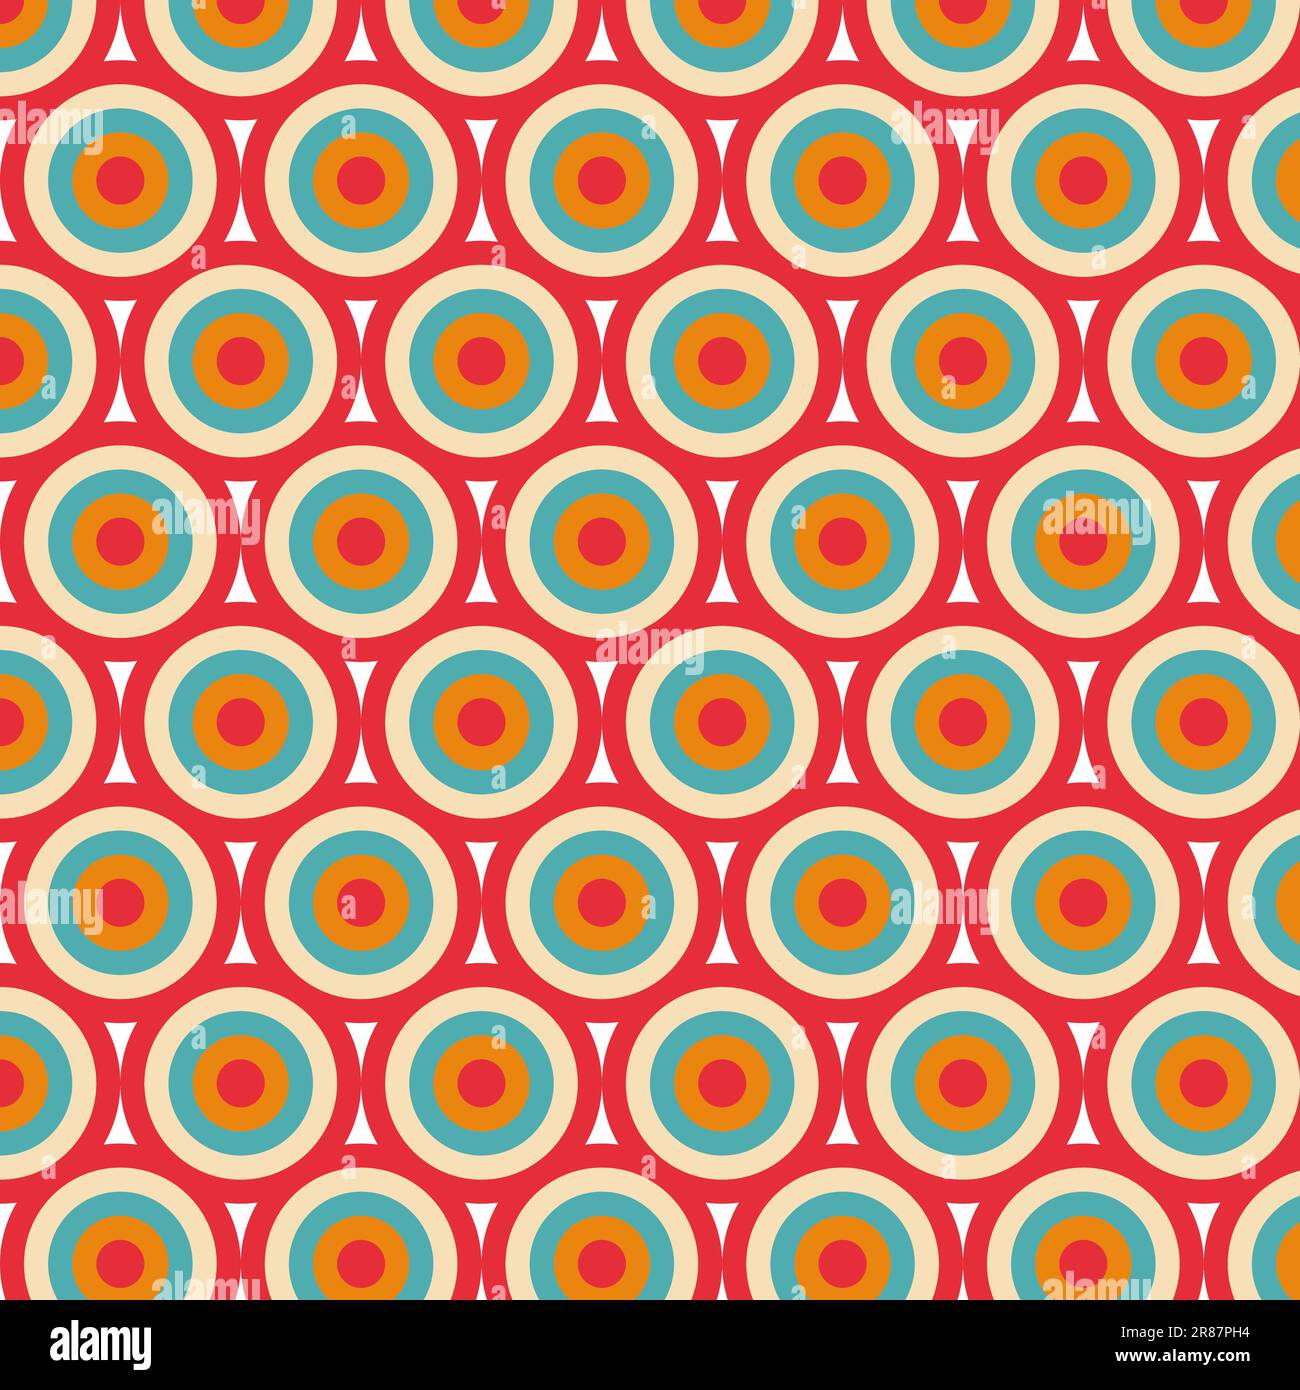 Mid Century Modern Style Pattern With Circles. Geometric Vintage Wallpaper Stock Vector